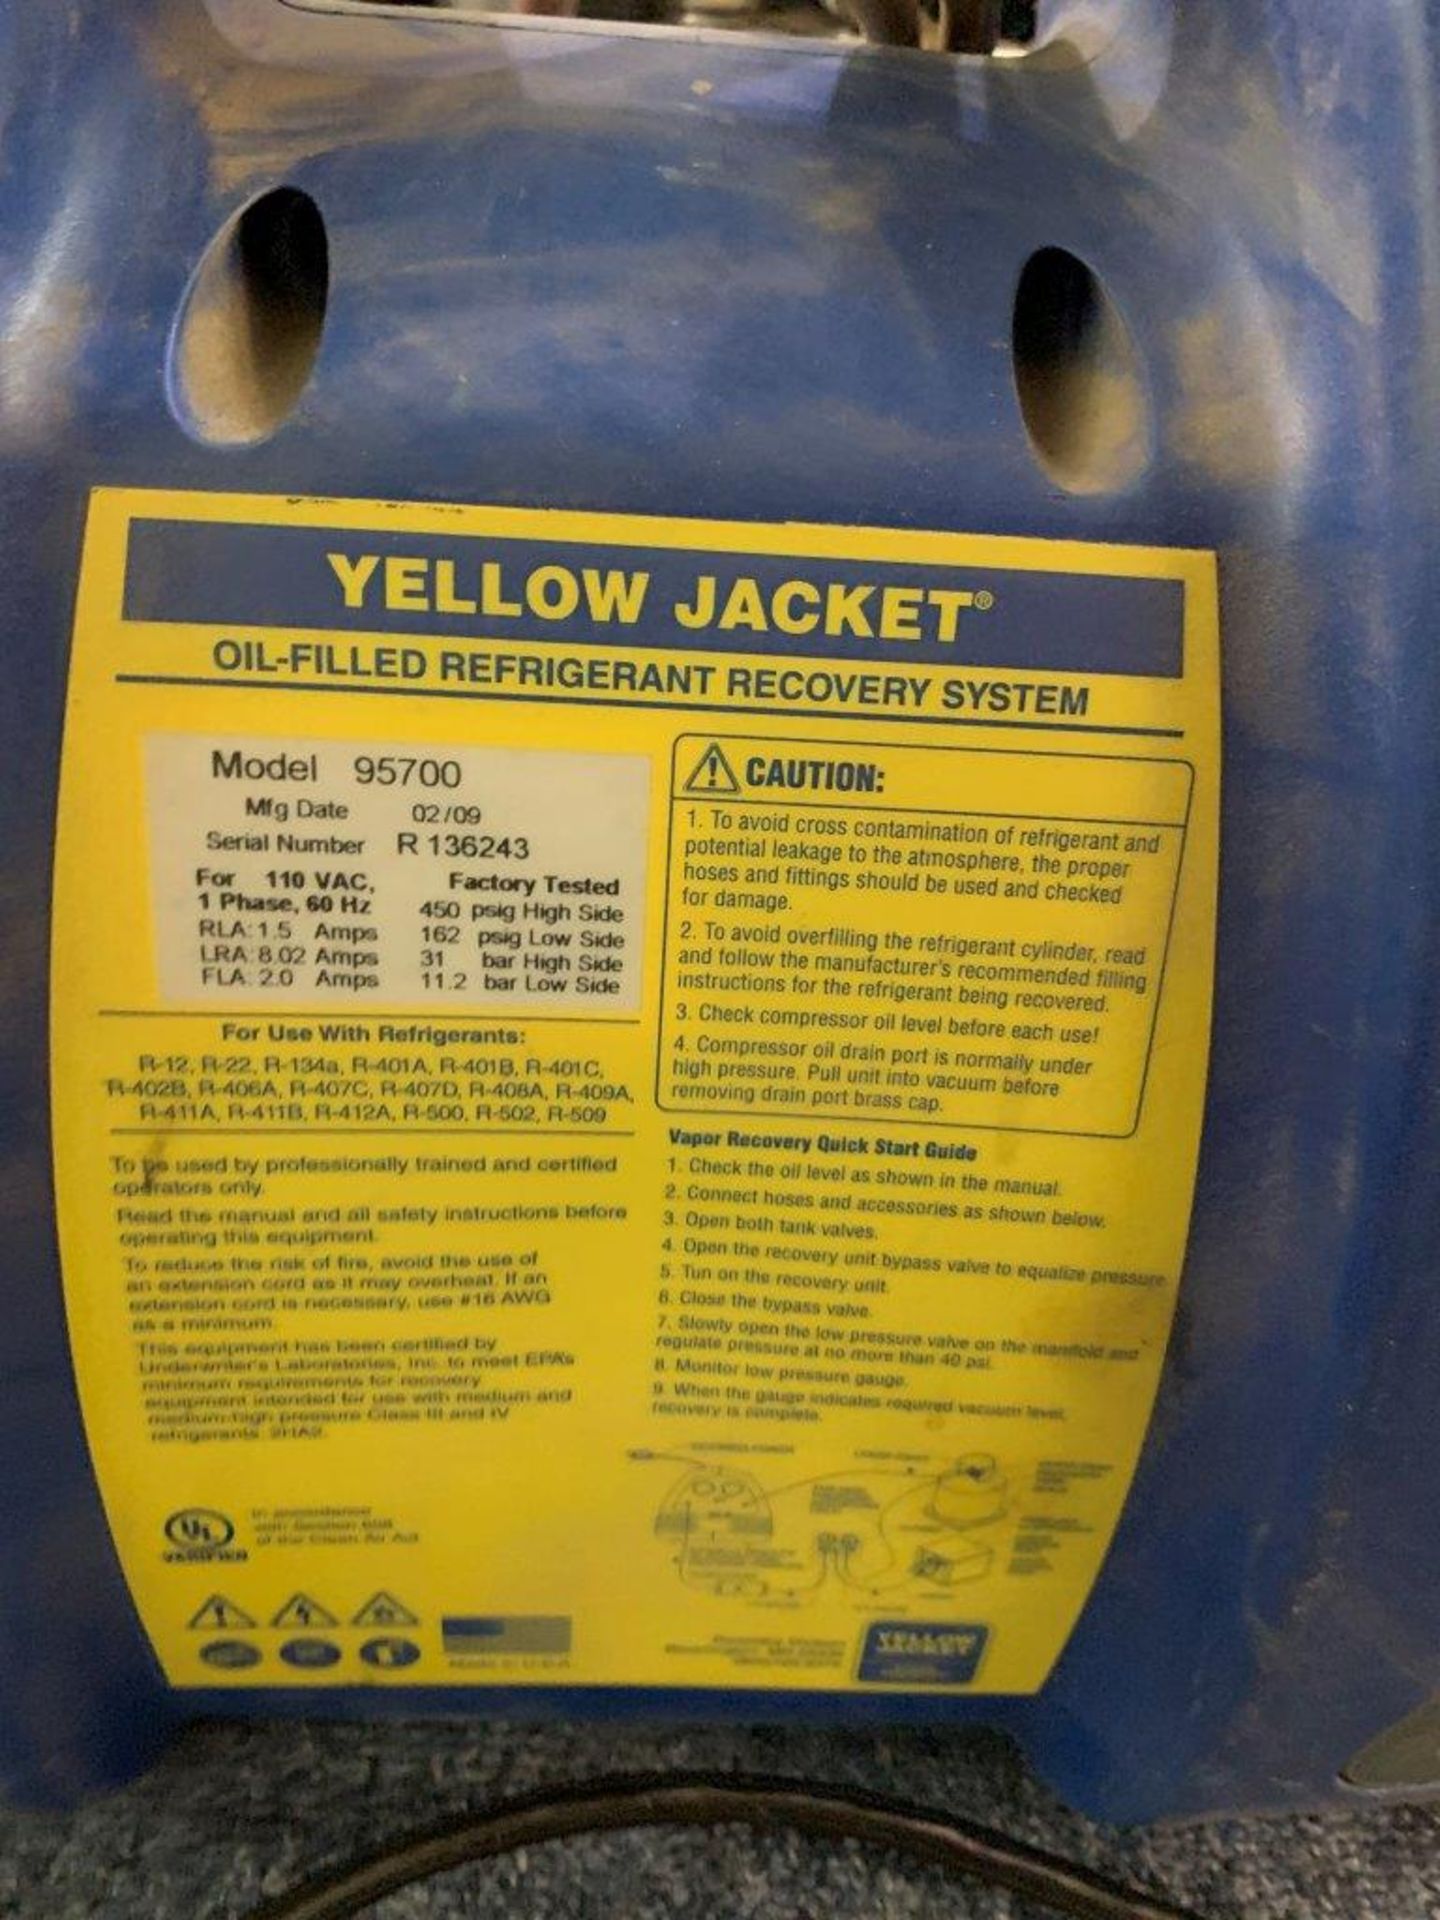 YELLOW JACKET OIL-FILLED REFRIGERANT RECOVERY SYSTEM - Image 3 of 4